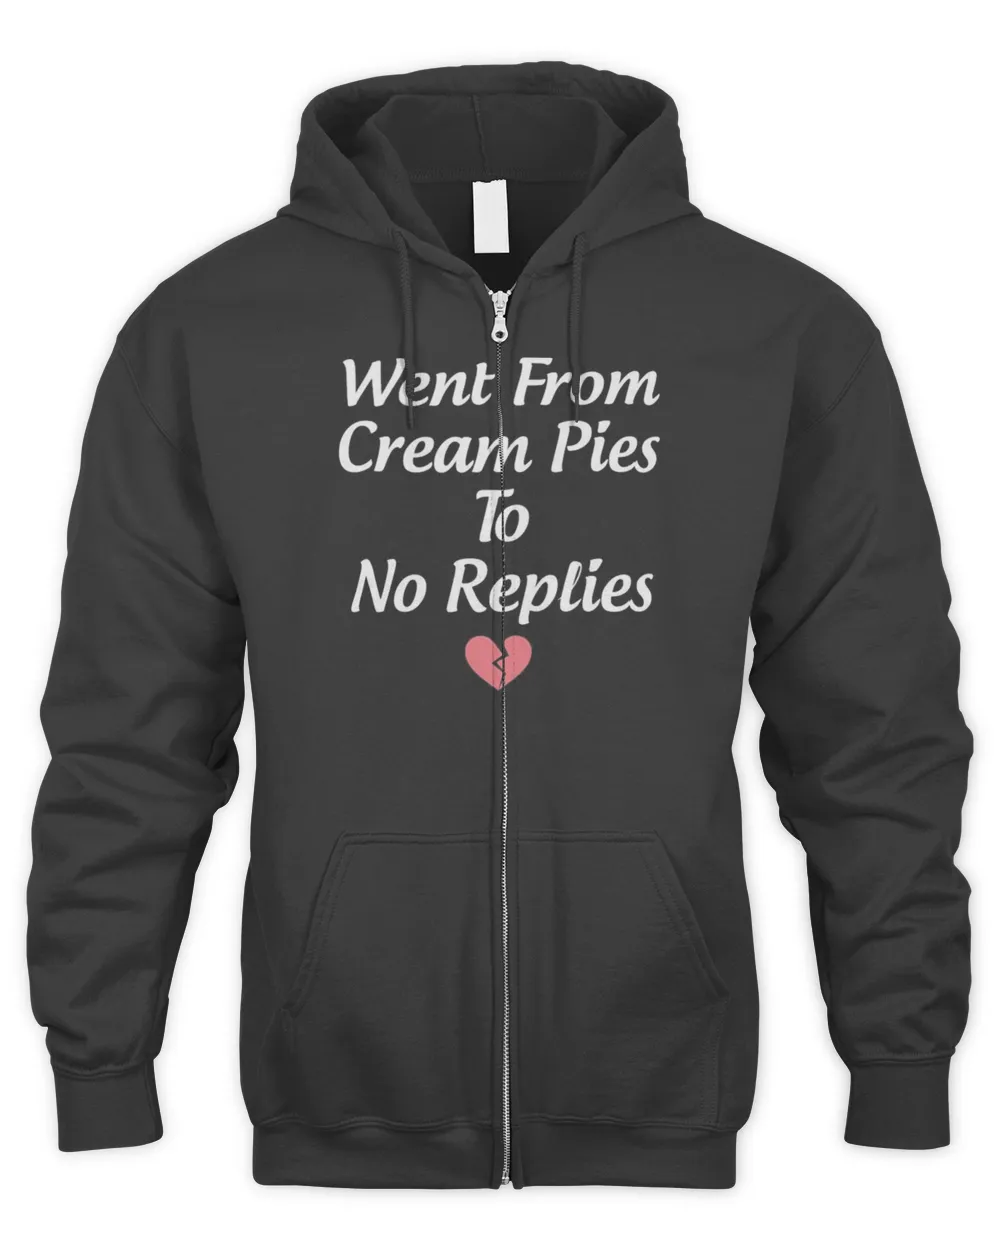 Went from cream pies to no replies shirt